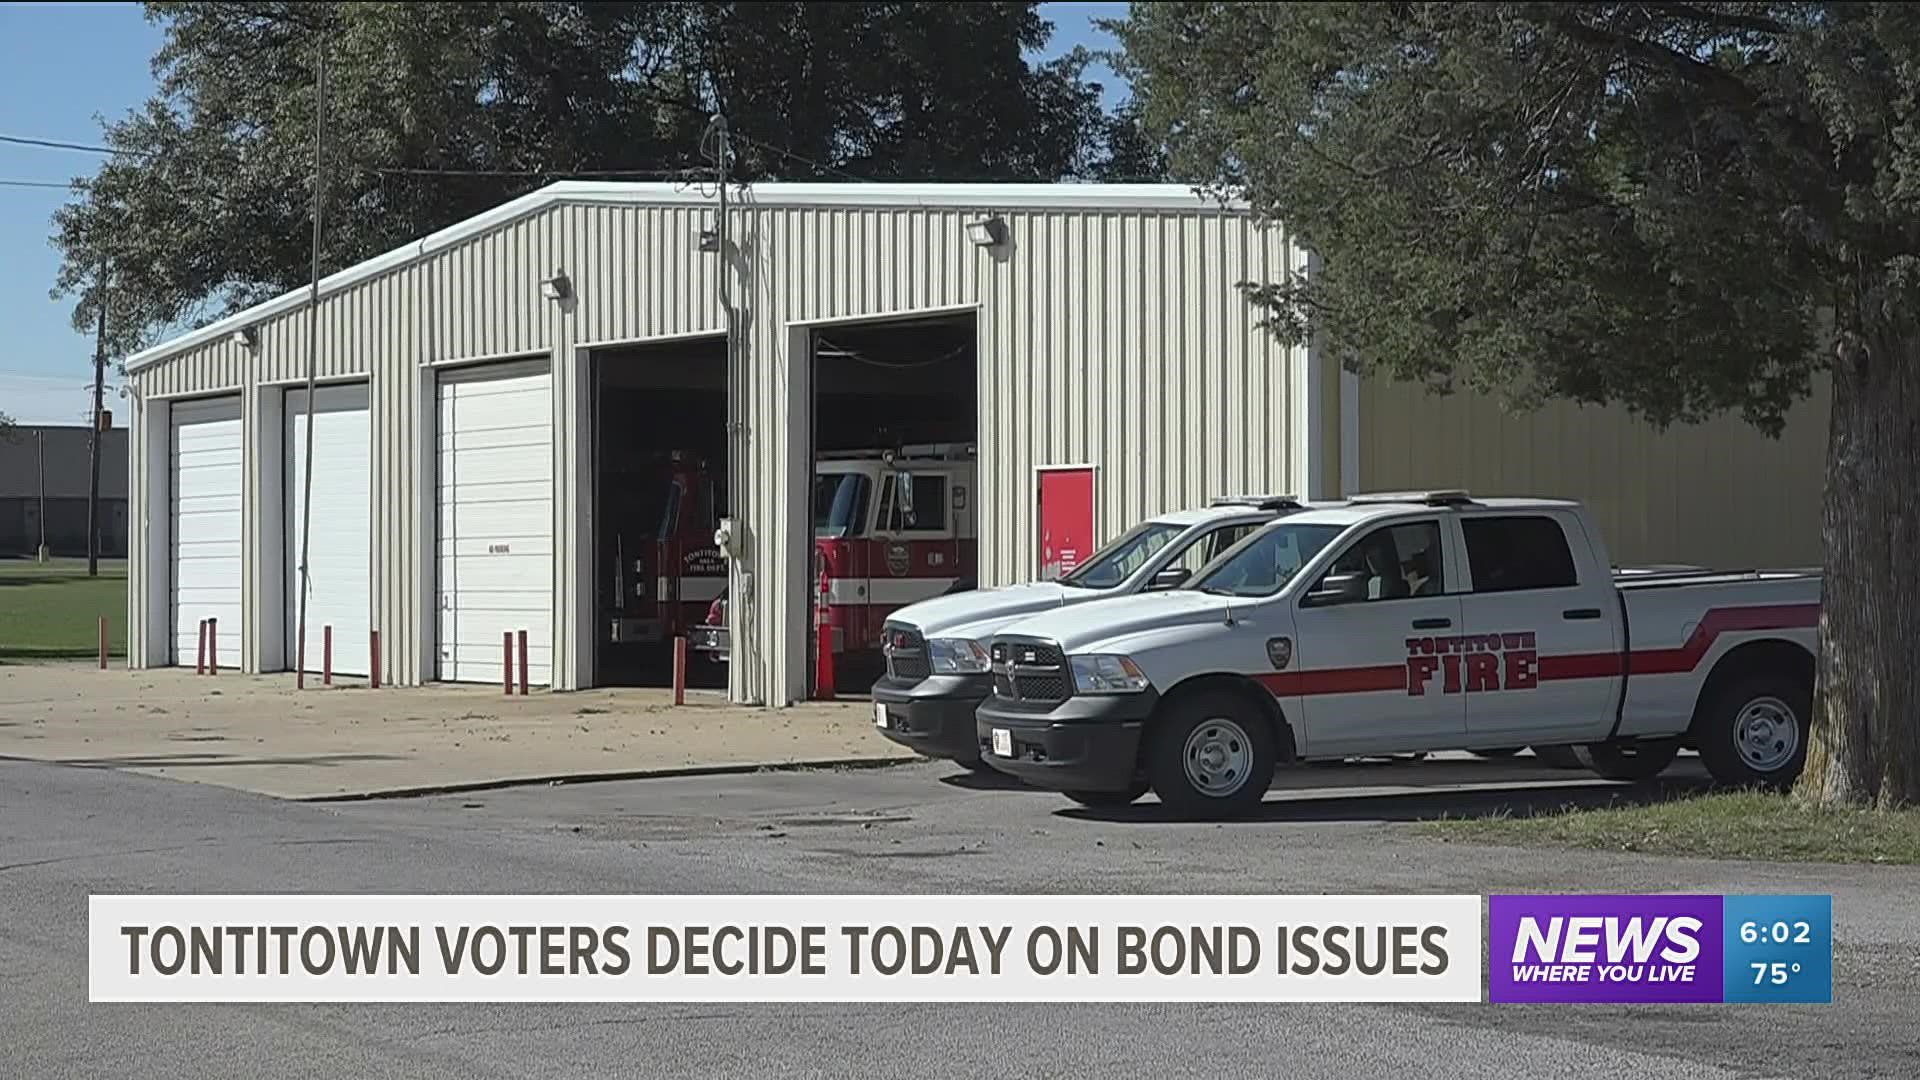 Voters will decide on a bond issue that could finance a new fire station in the city and bring water and sewer improvements.